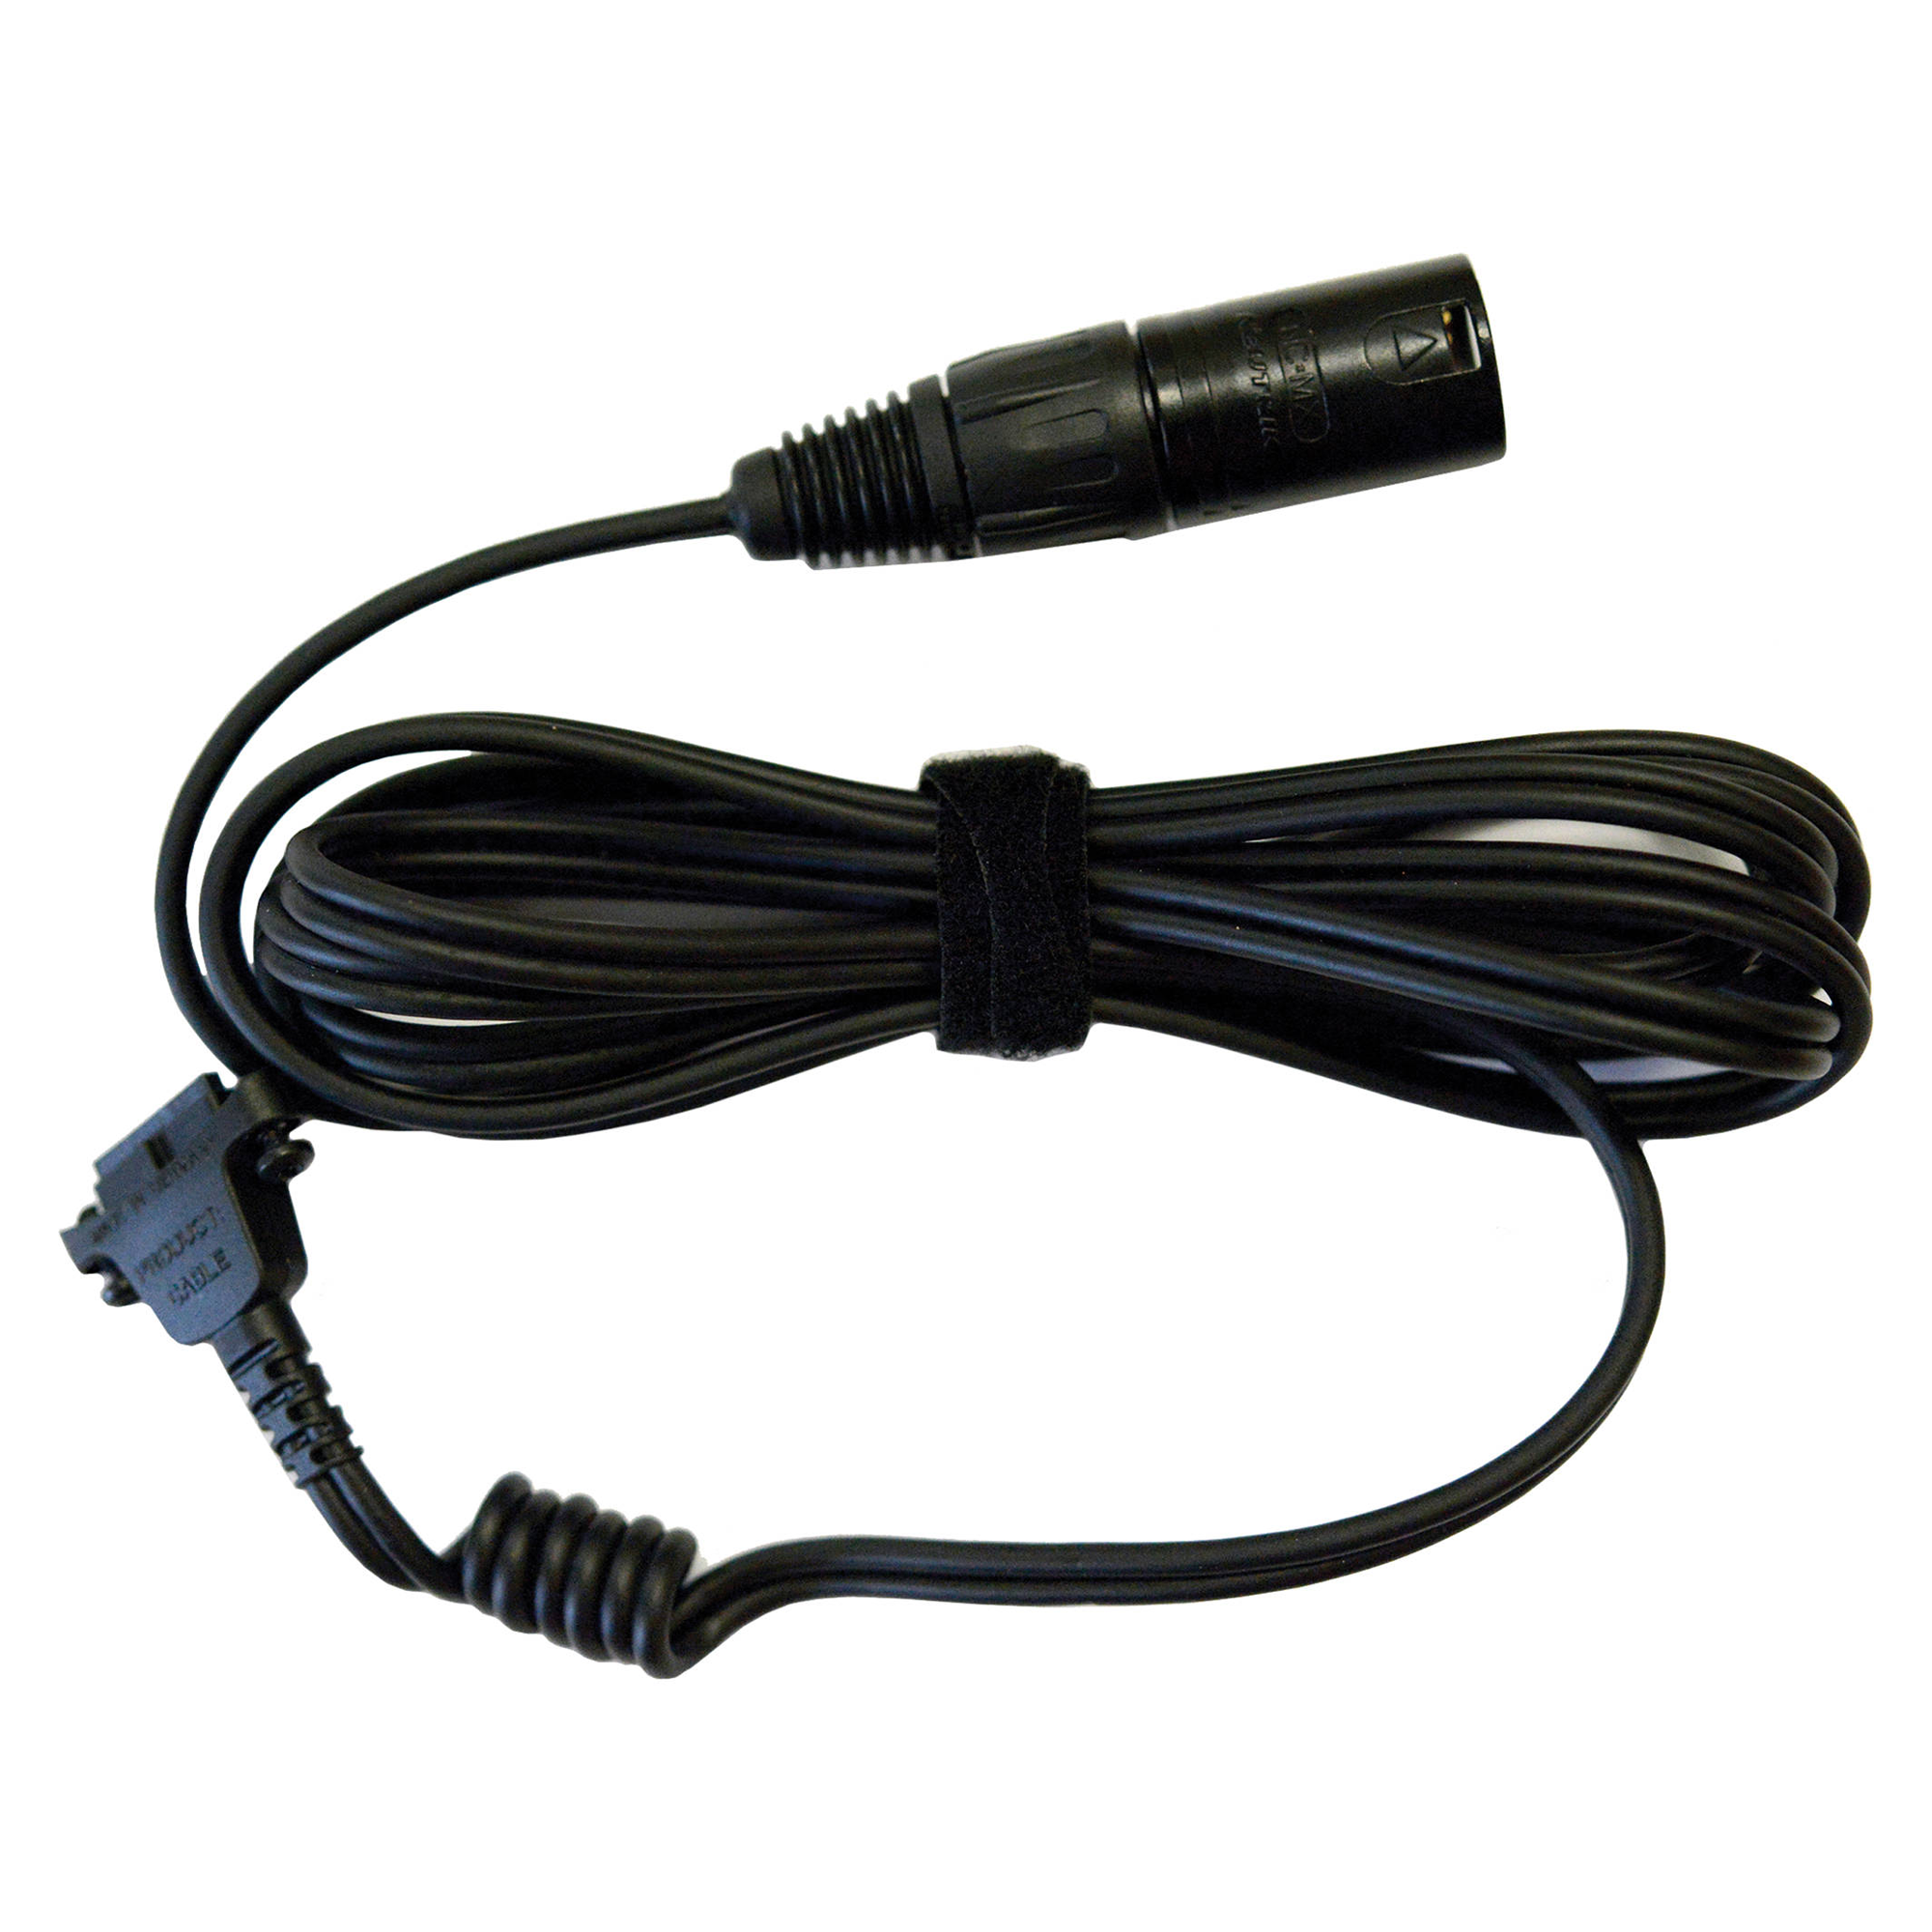 Sennheiser CABLE-II-X5 Copper Cable, 2m, Reinforced for Improved Durability, XLR-5M Connector